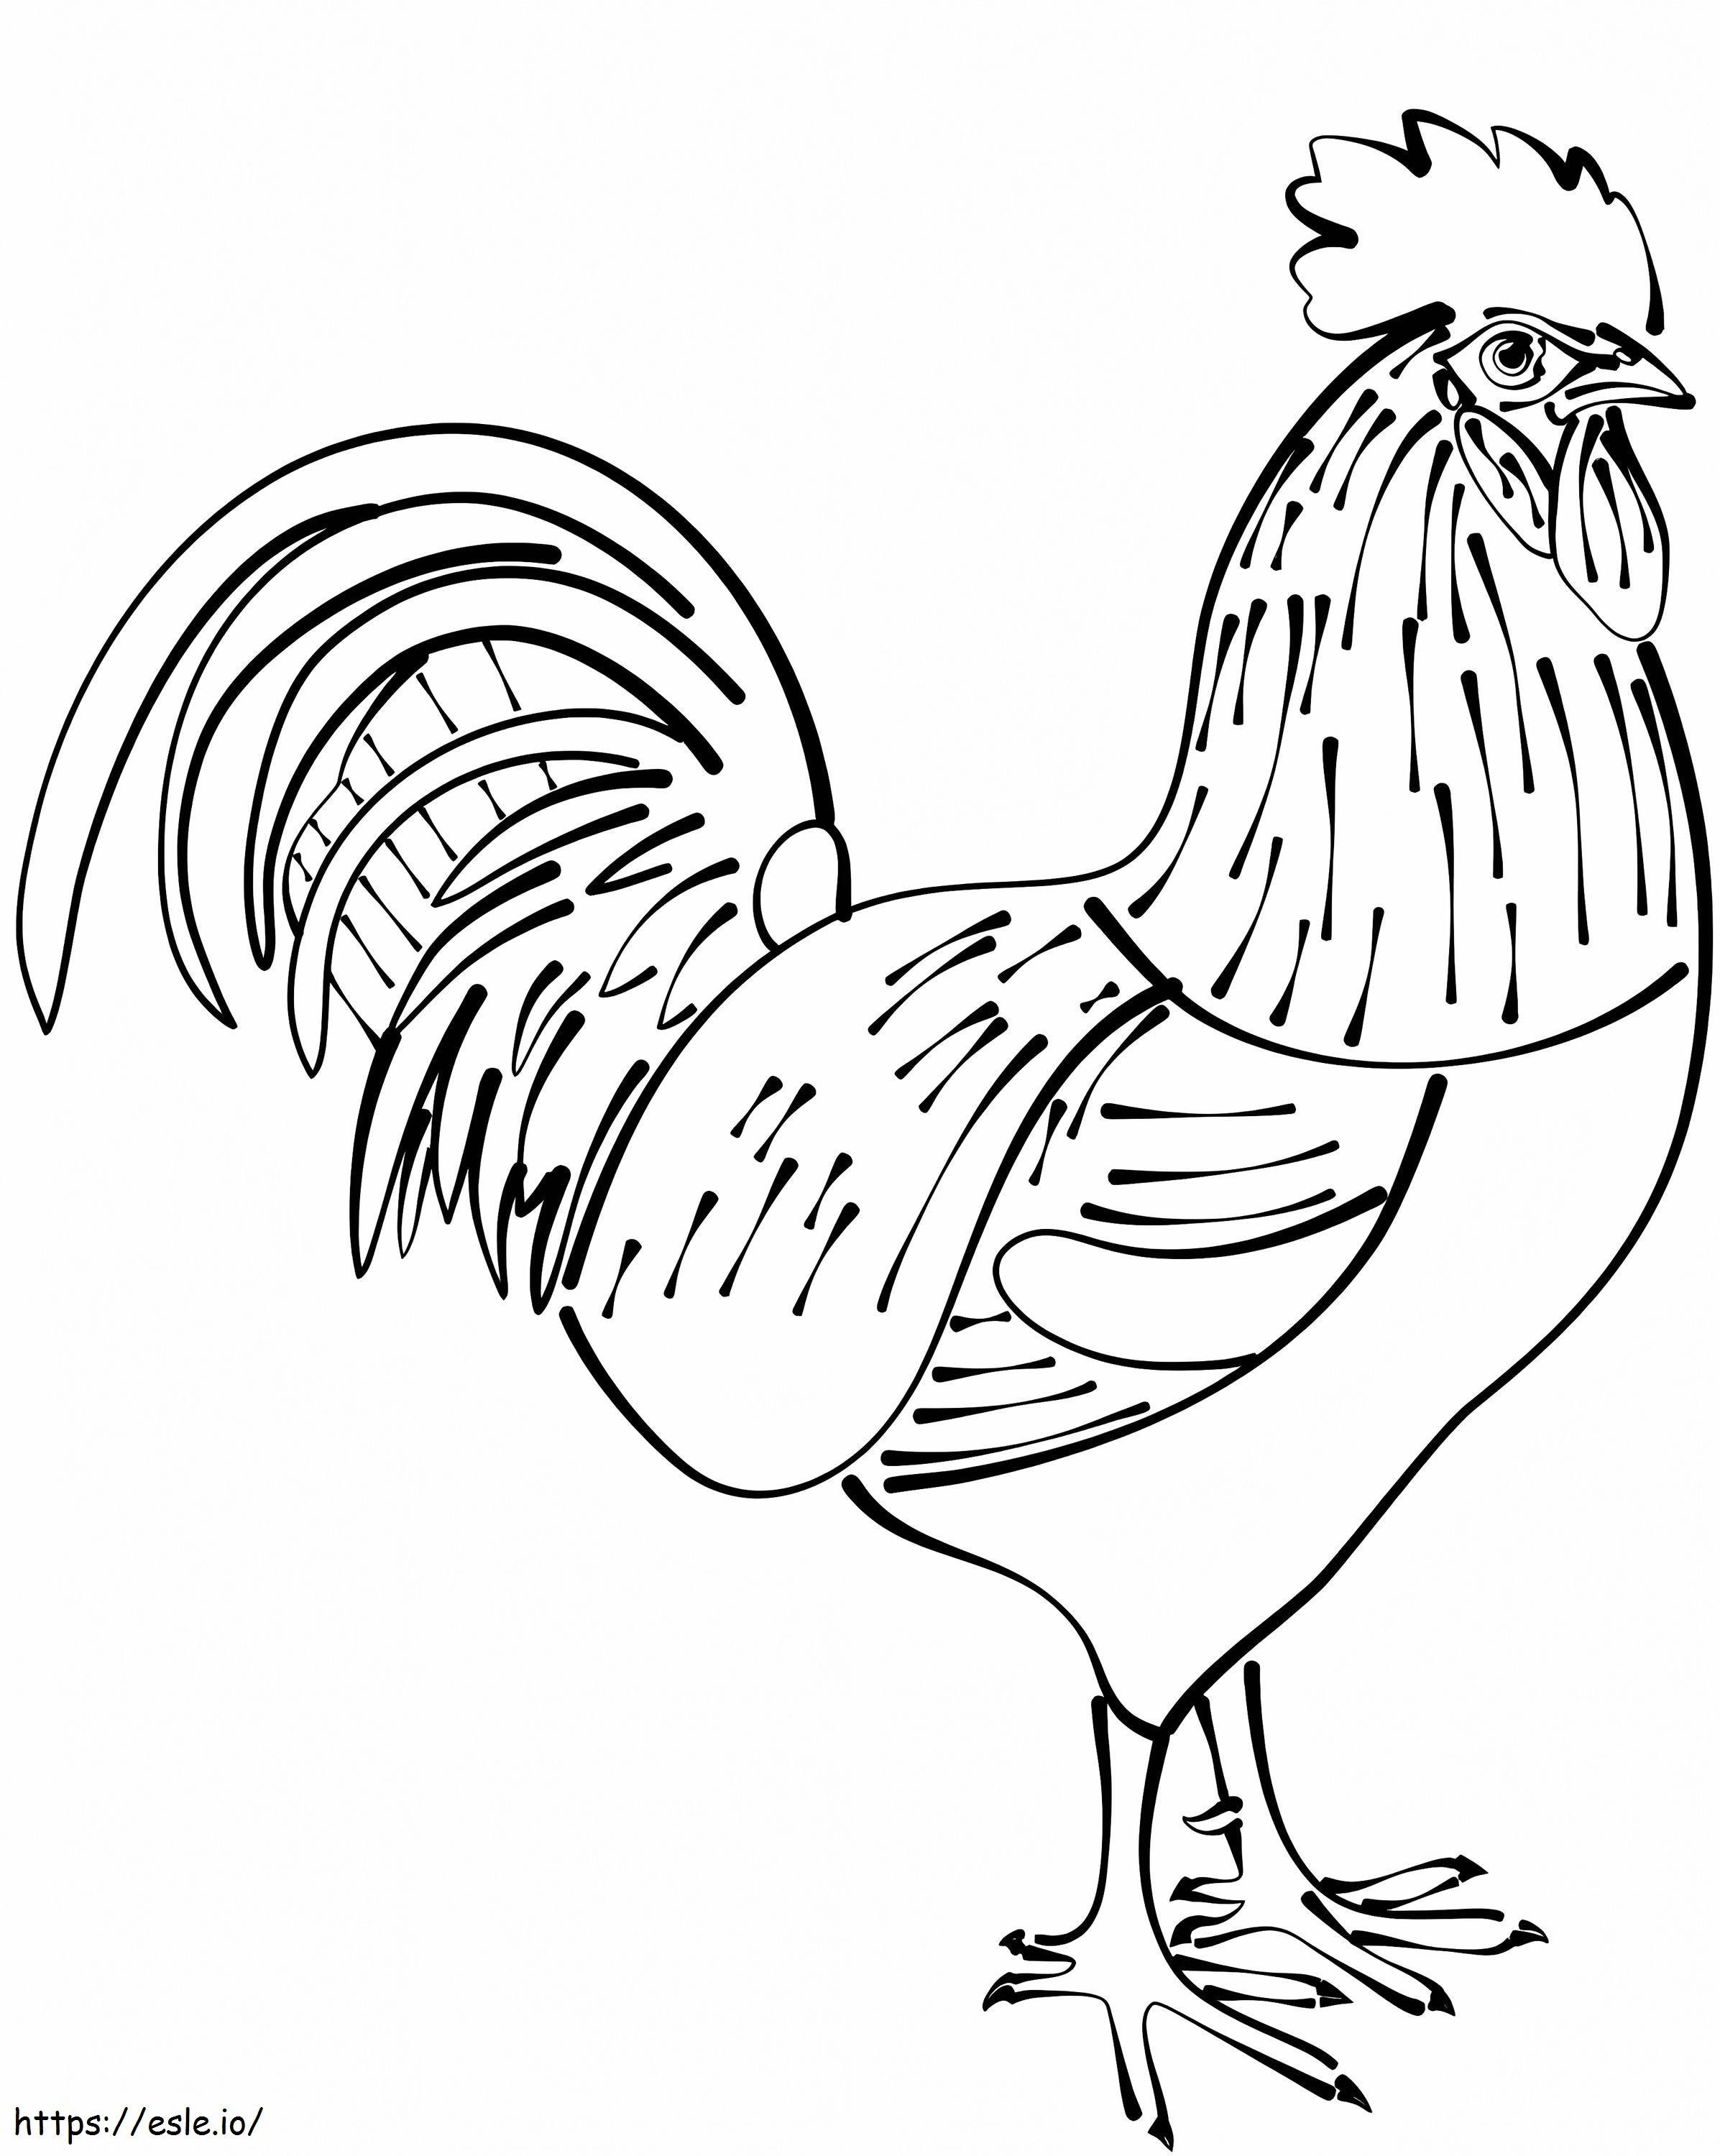 Normal Rooster 1 coloring page